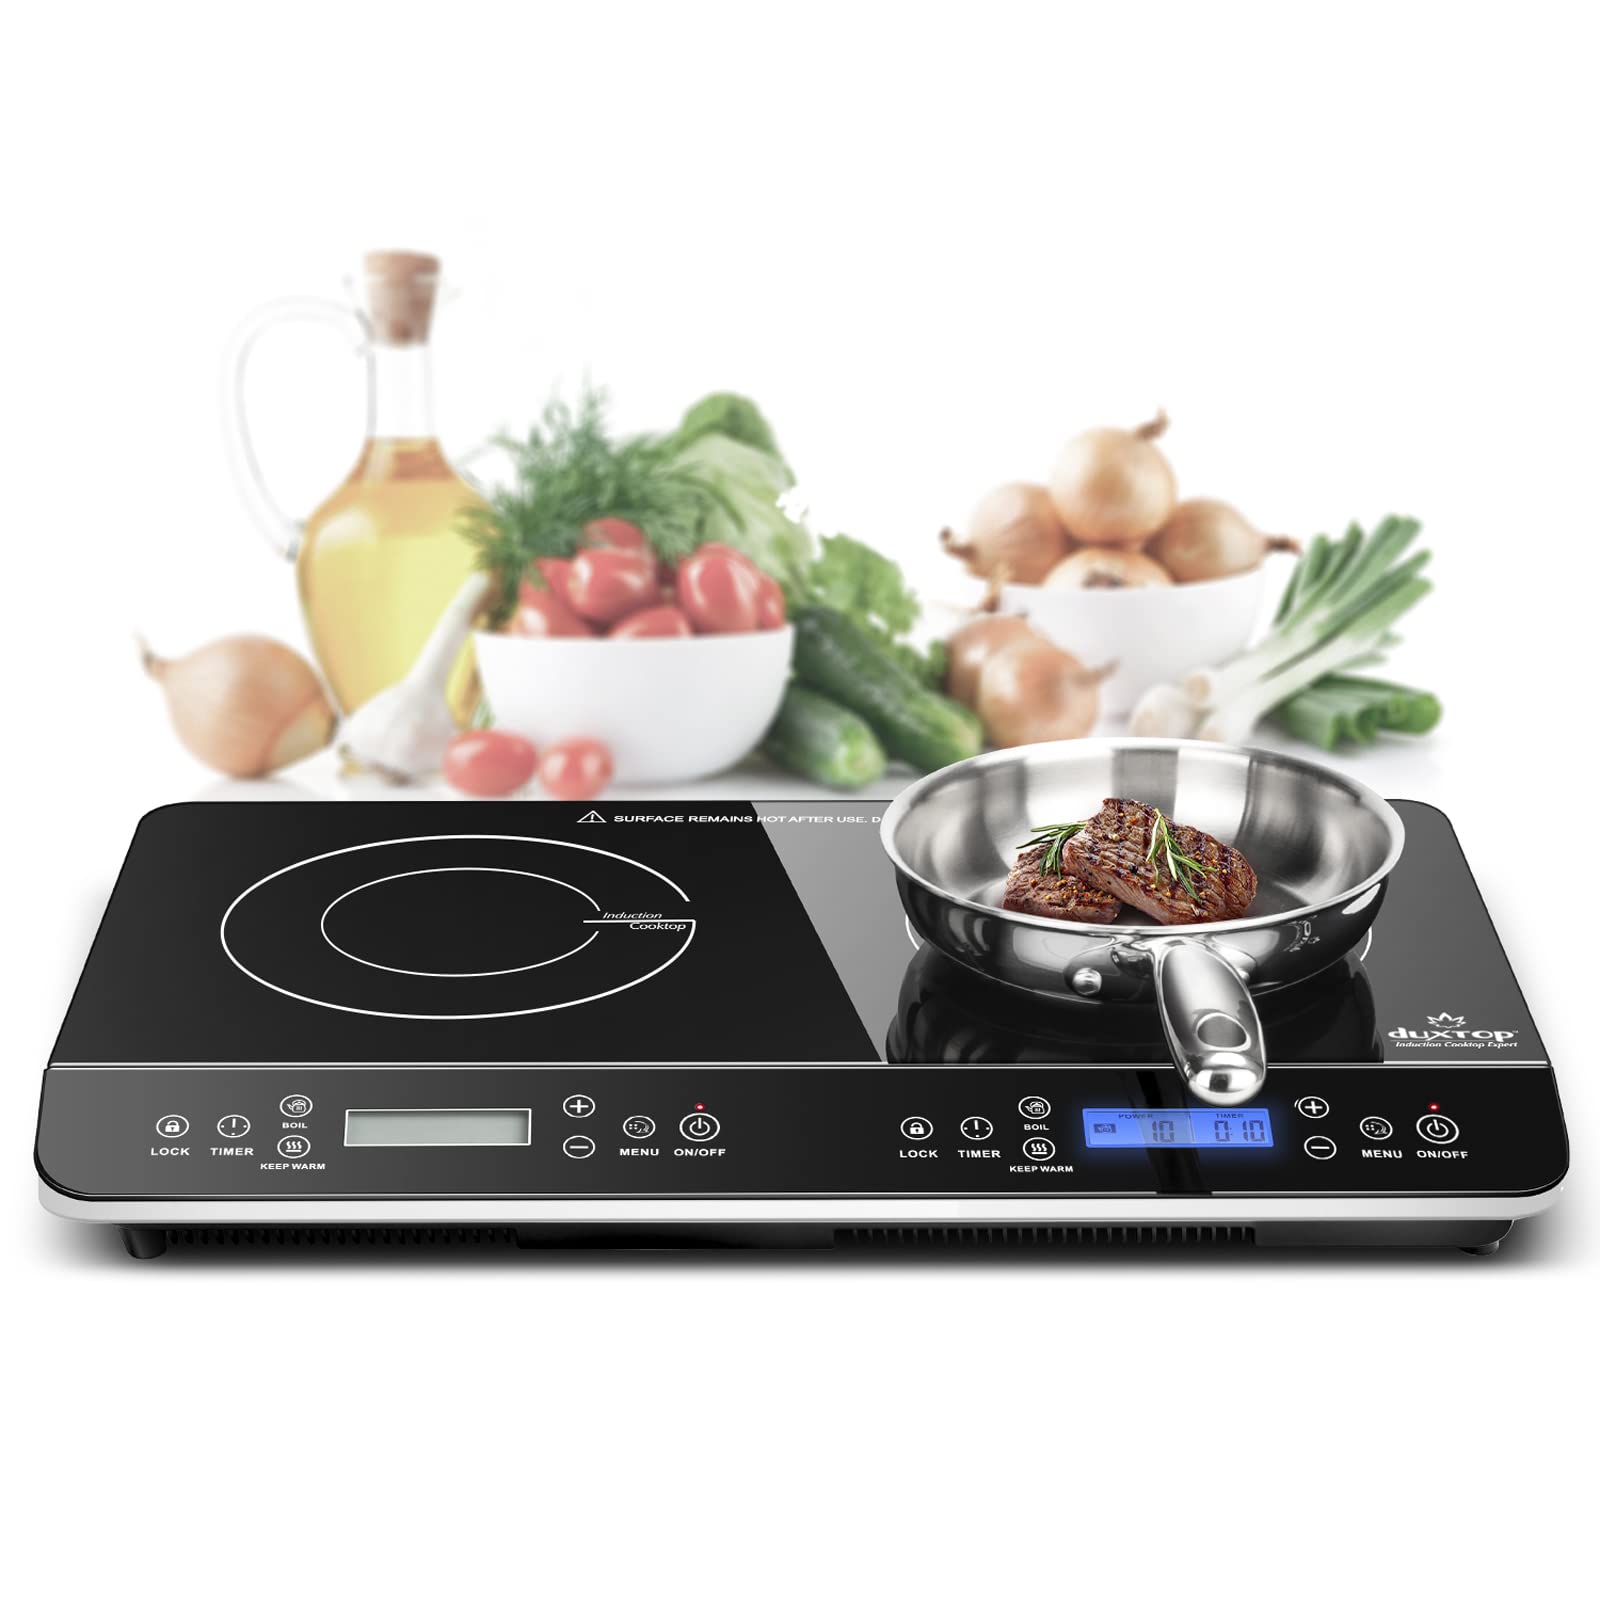 Duxtop LCD Portable Double Induction Cooktop